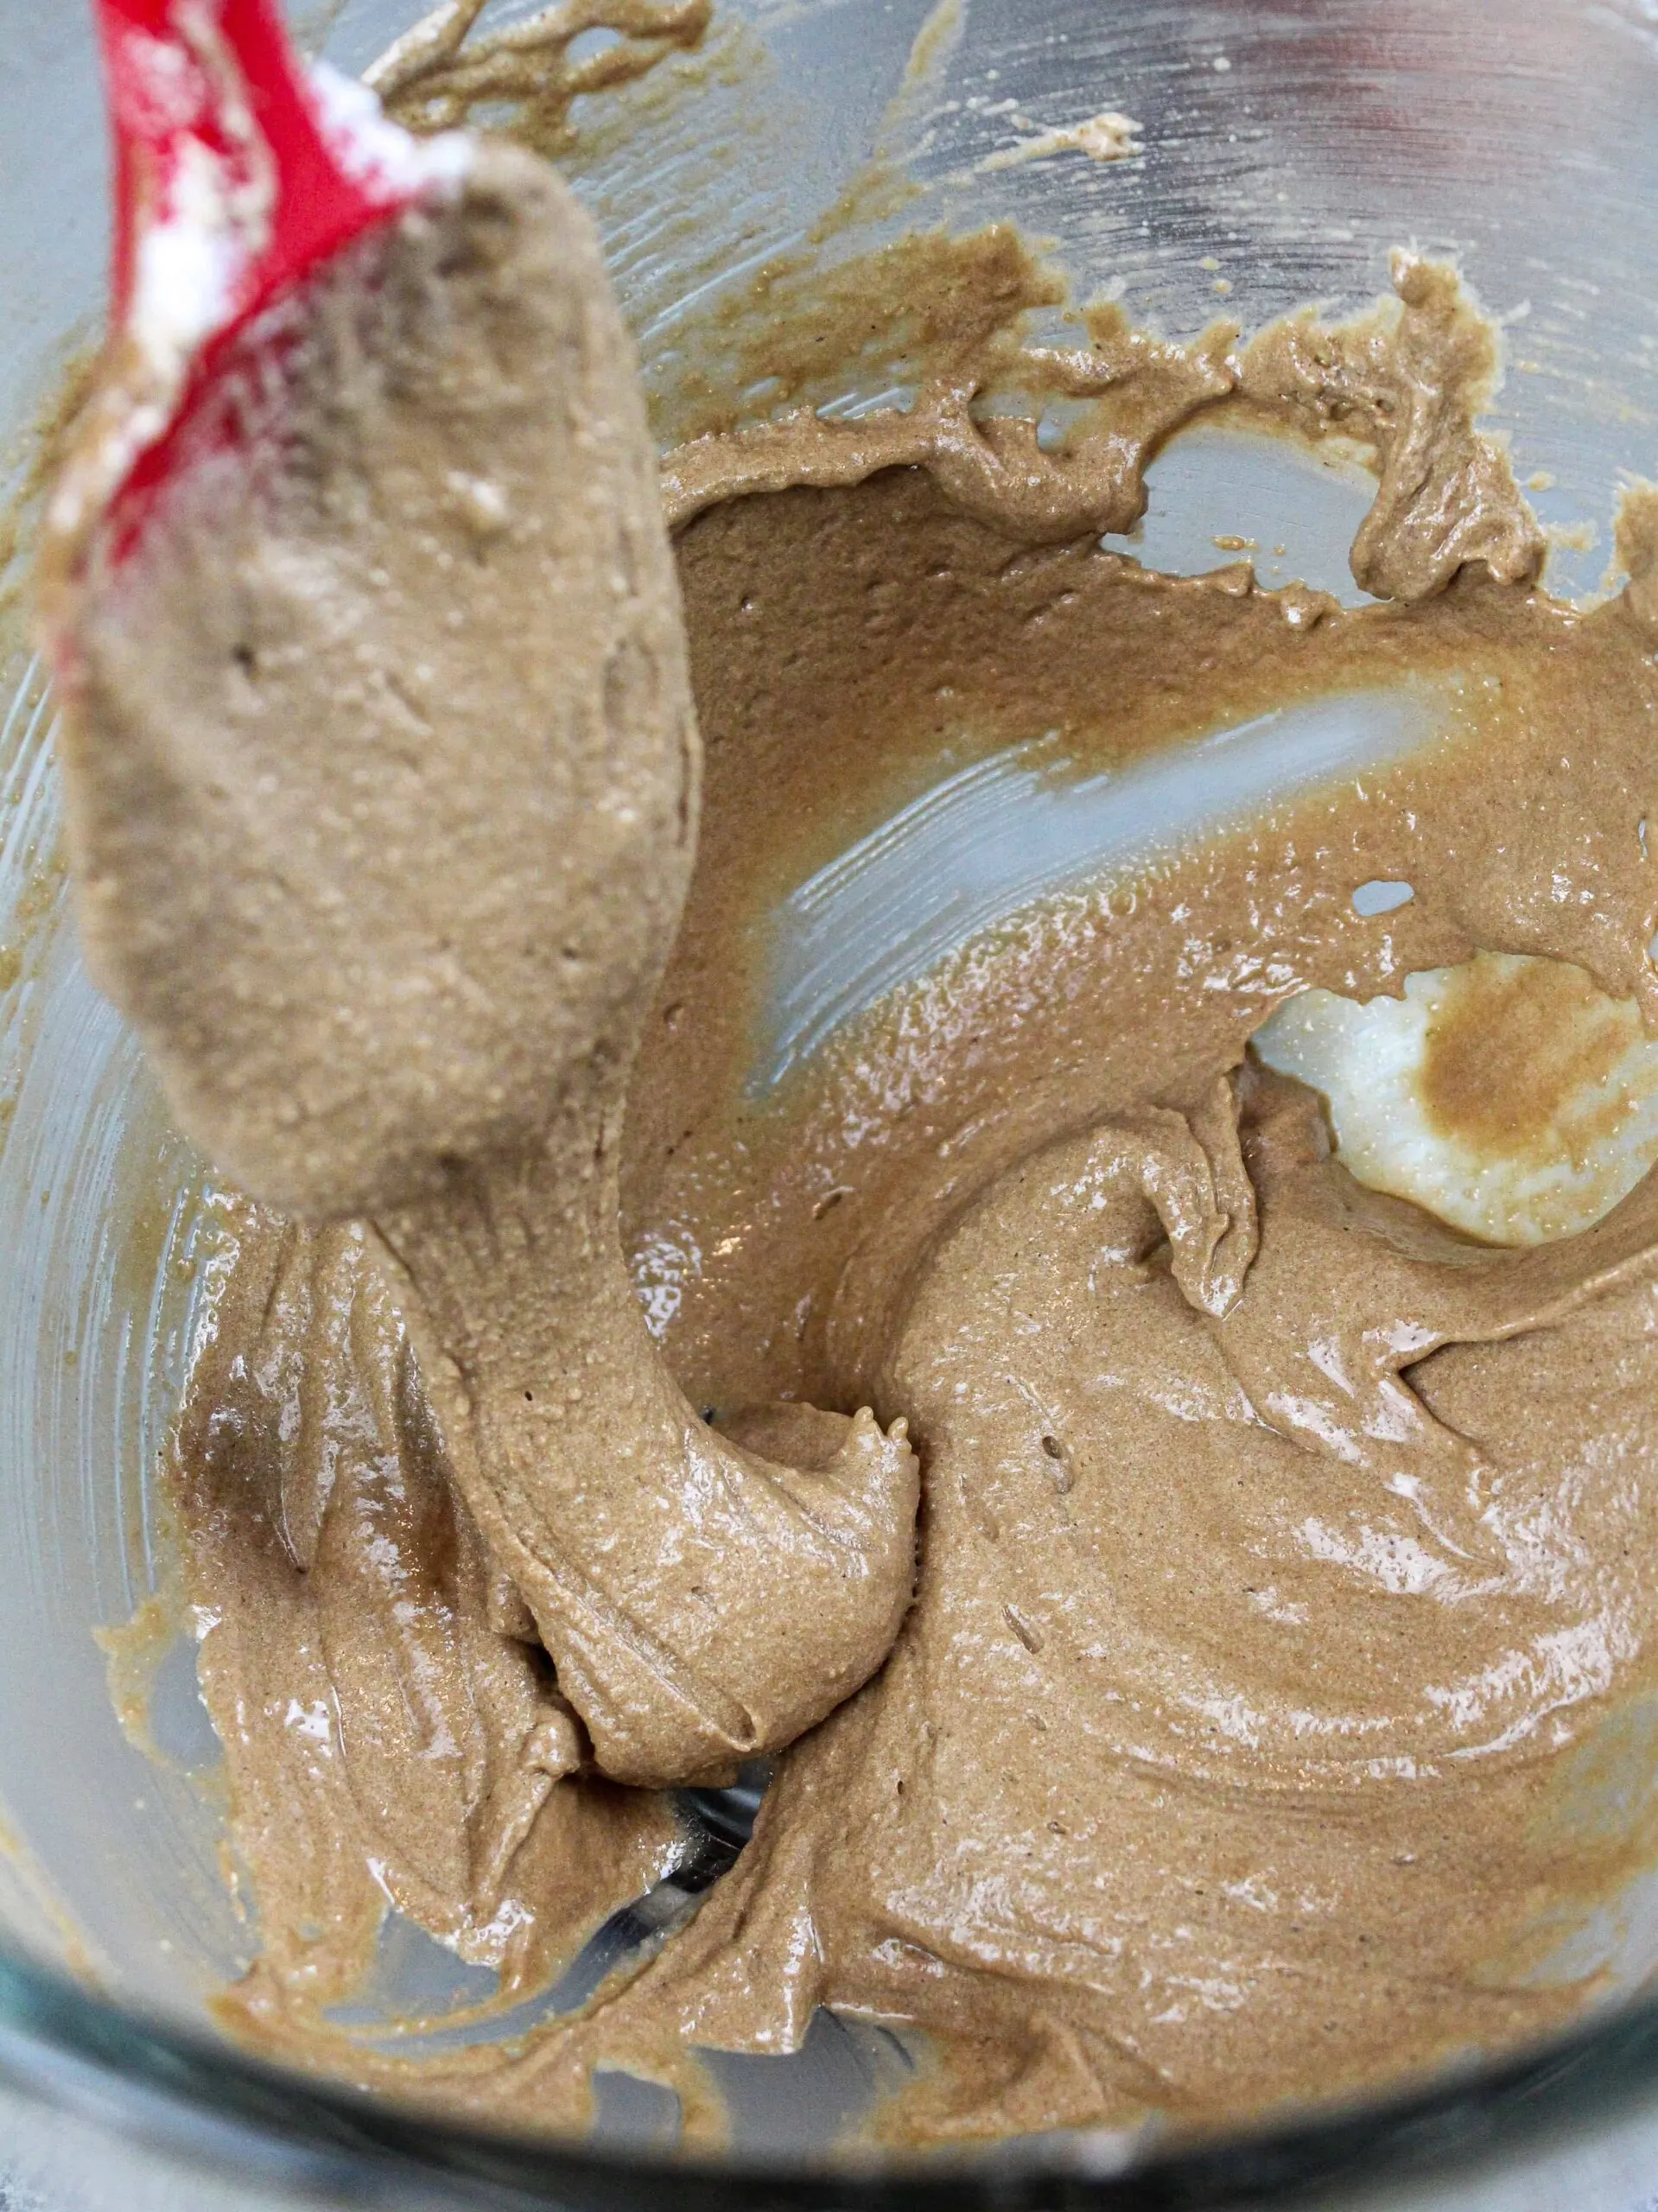 image of chocolate macaron batter ready to be piped